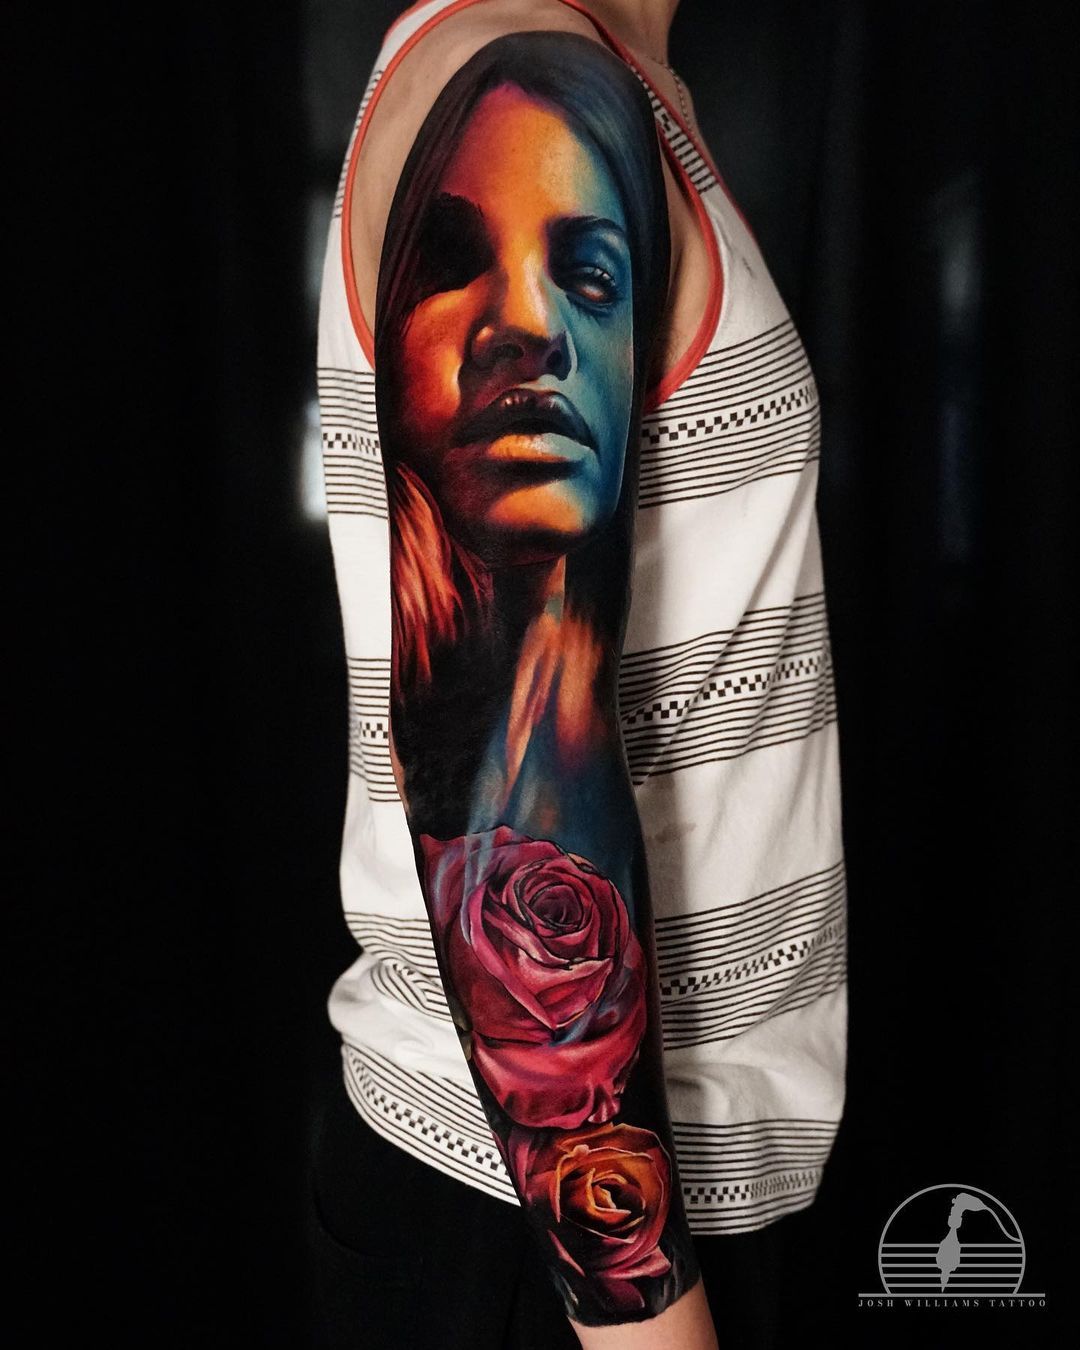 Tattoo uploaded by Jessie verve • Colourful realistic tattoo done at  Bangalore tattoo convention 2019 1 second place for best new school •  Tattoodo